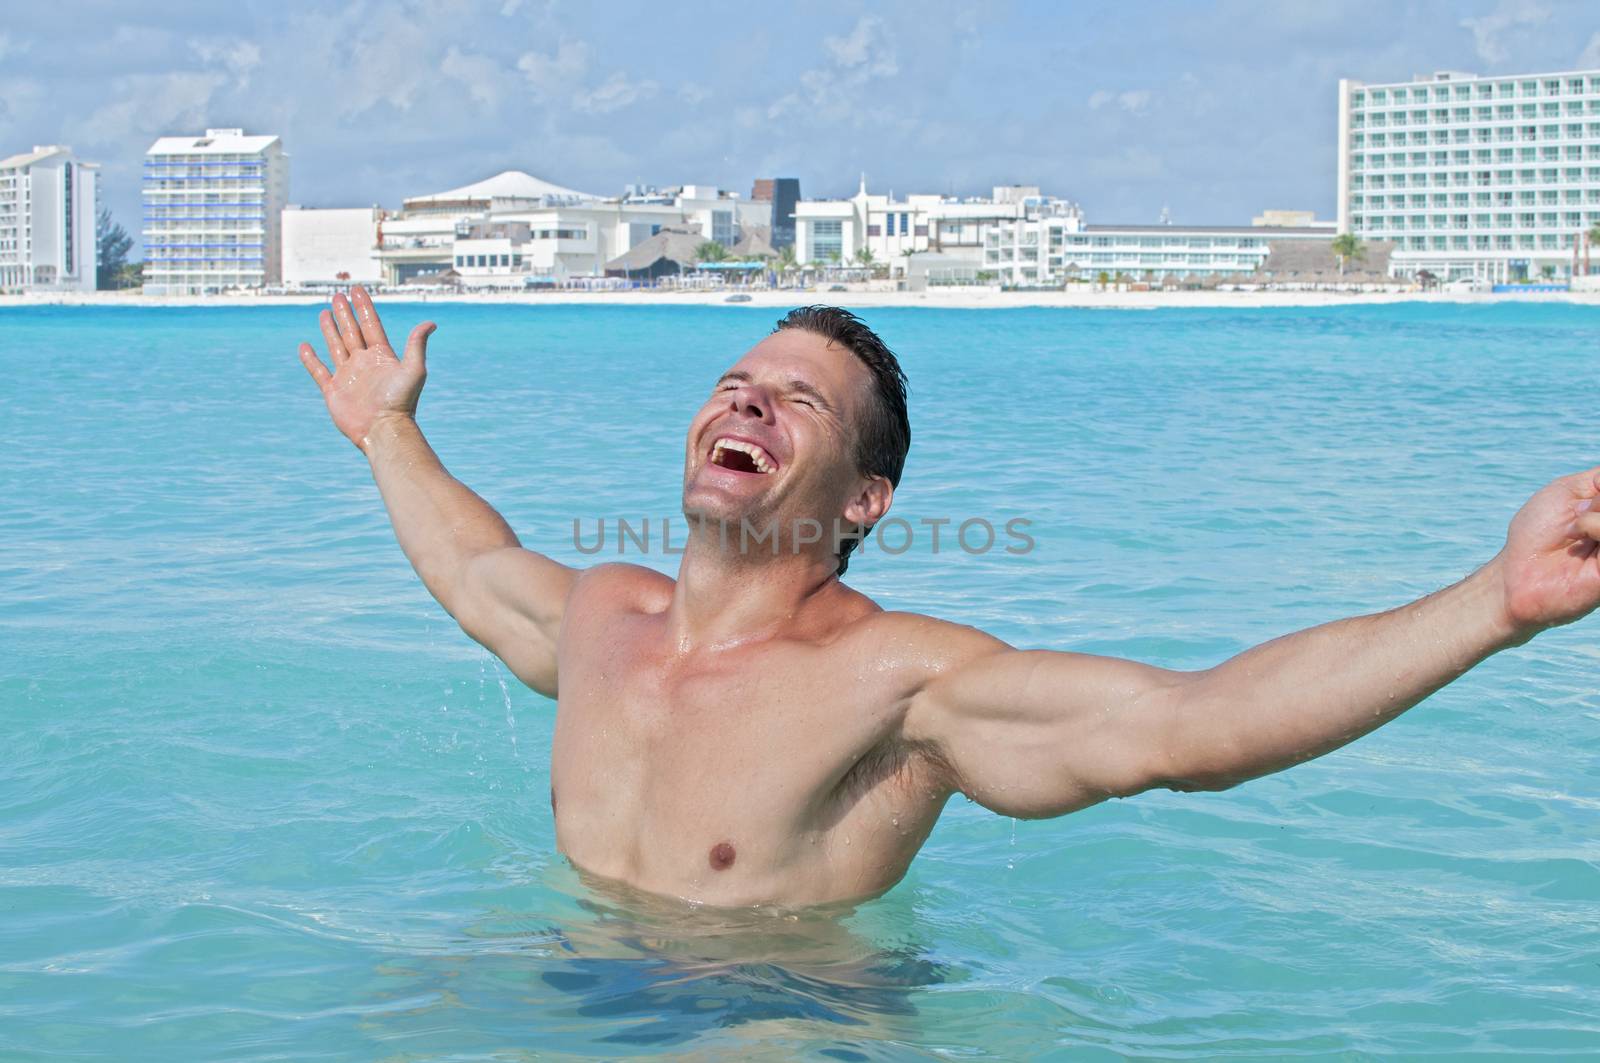 Young fit and shirtless Caucasian man celebrates with arms outstretched in shallow tropical waters of beach resort